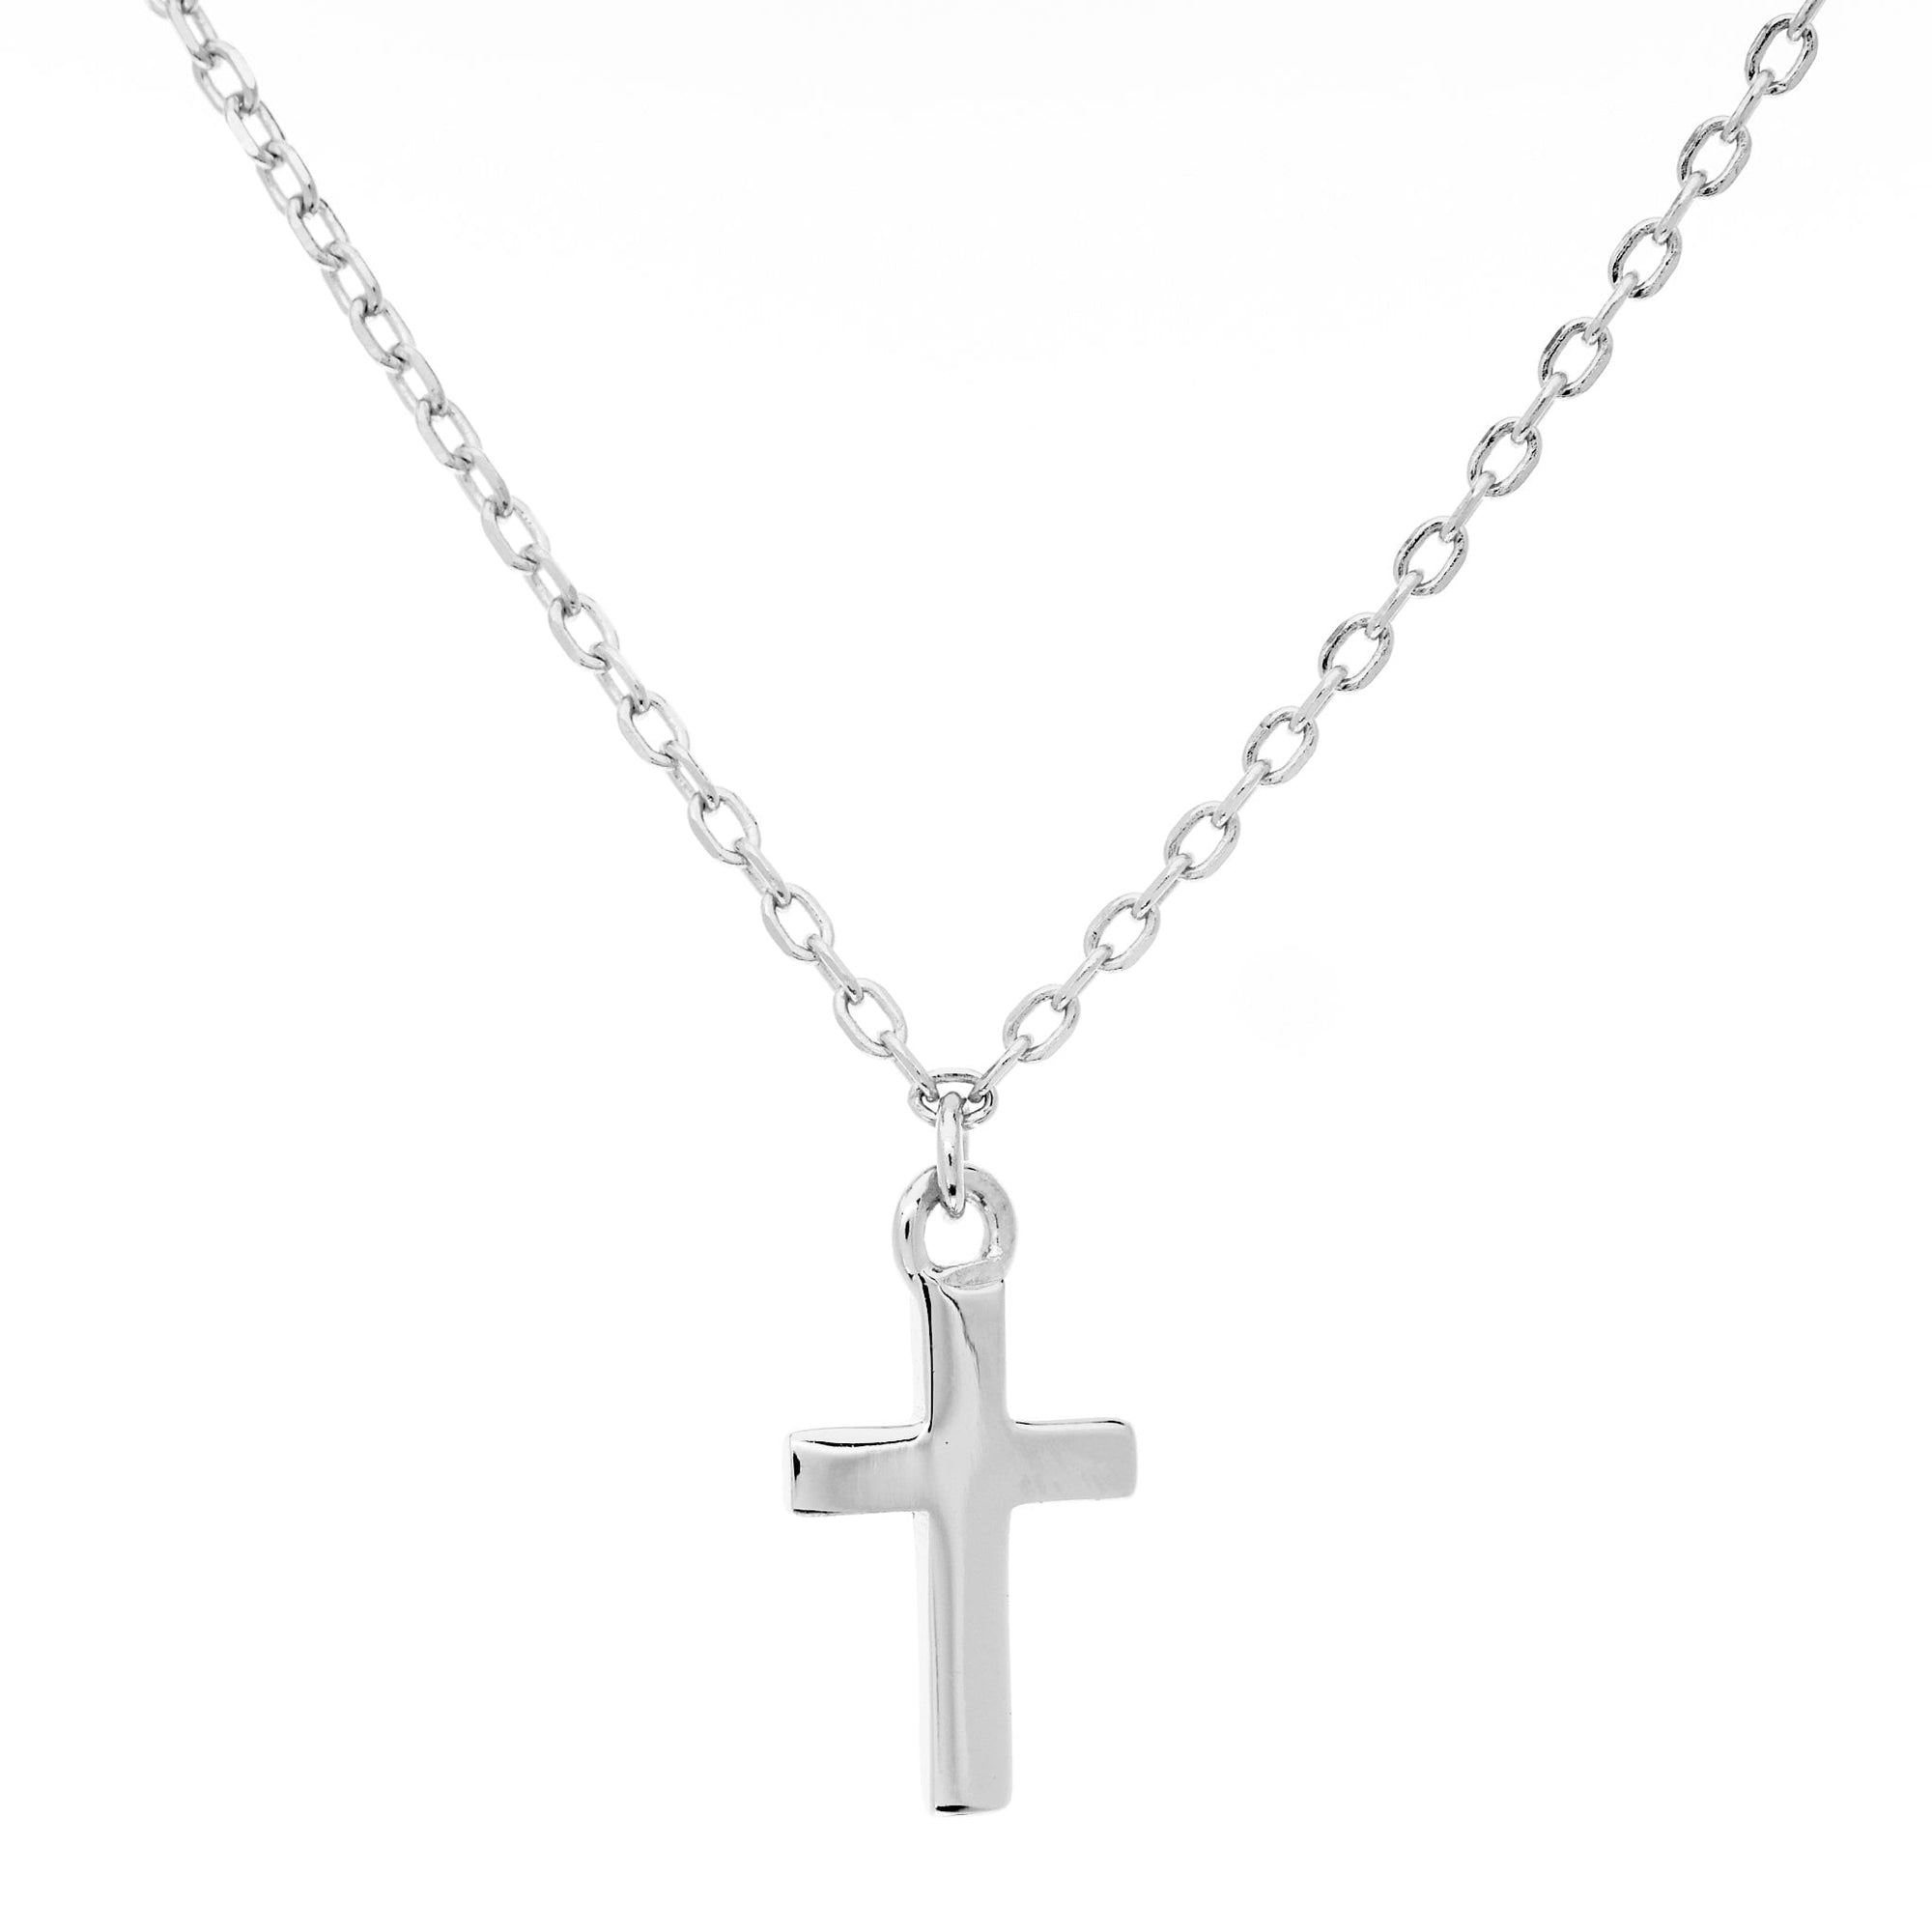 Duo Jewellery Necklaces Duo Cross Necklace